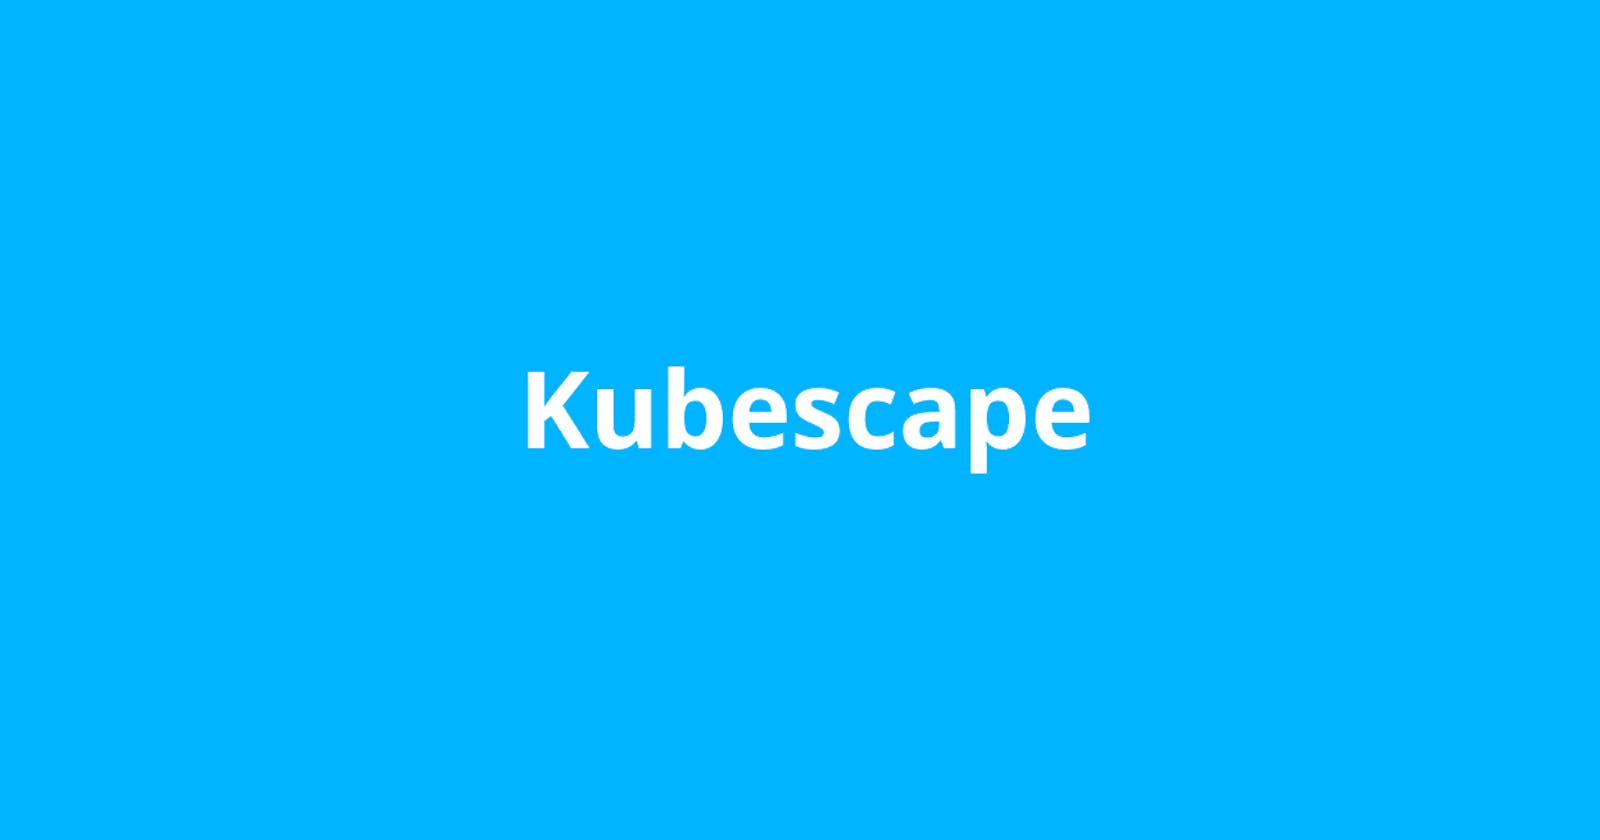 Security with Kubescape